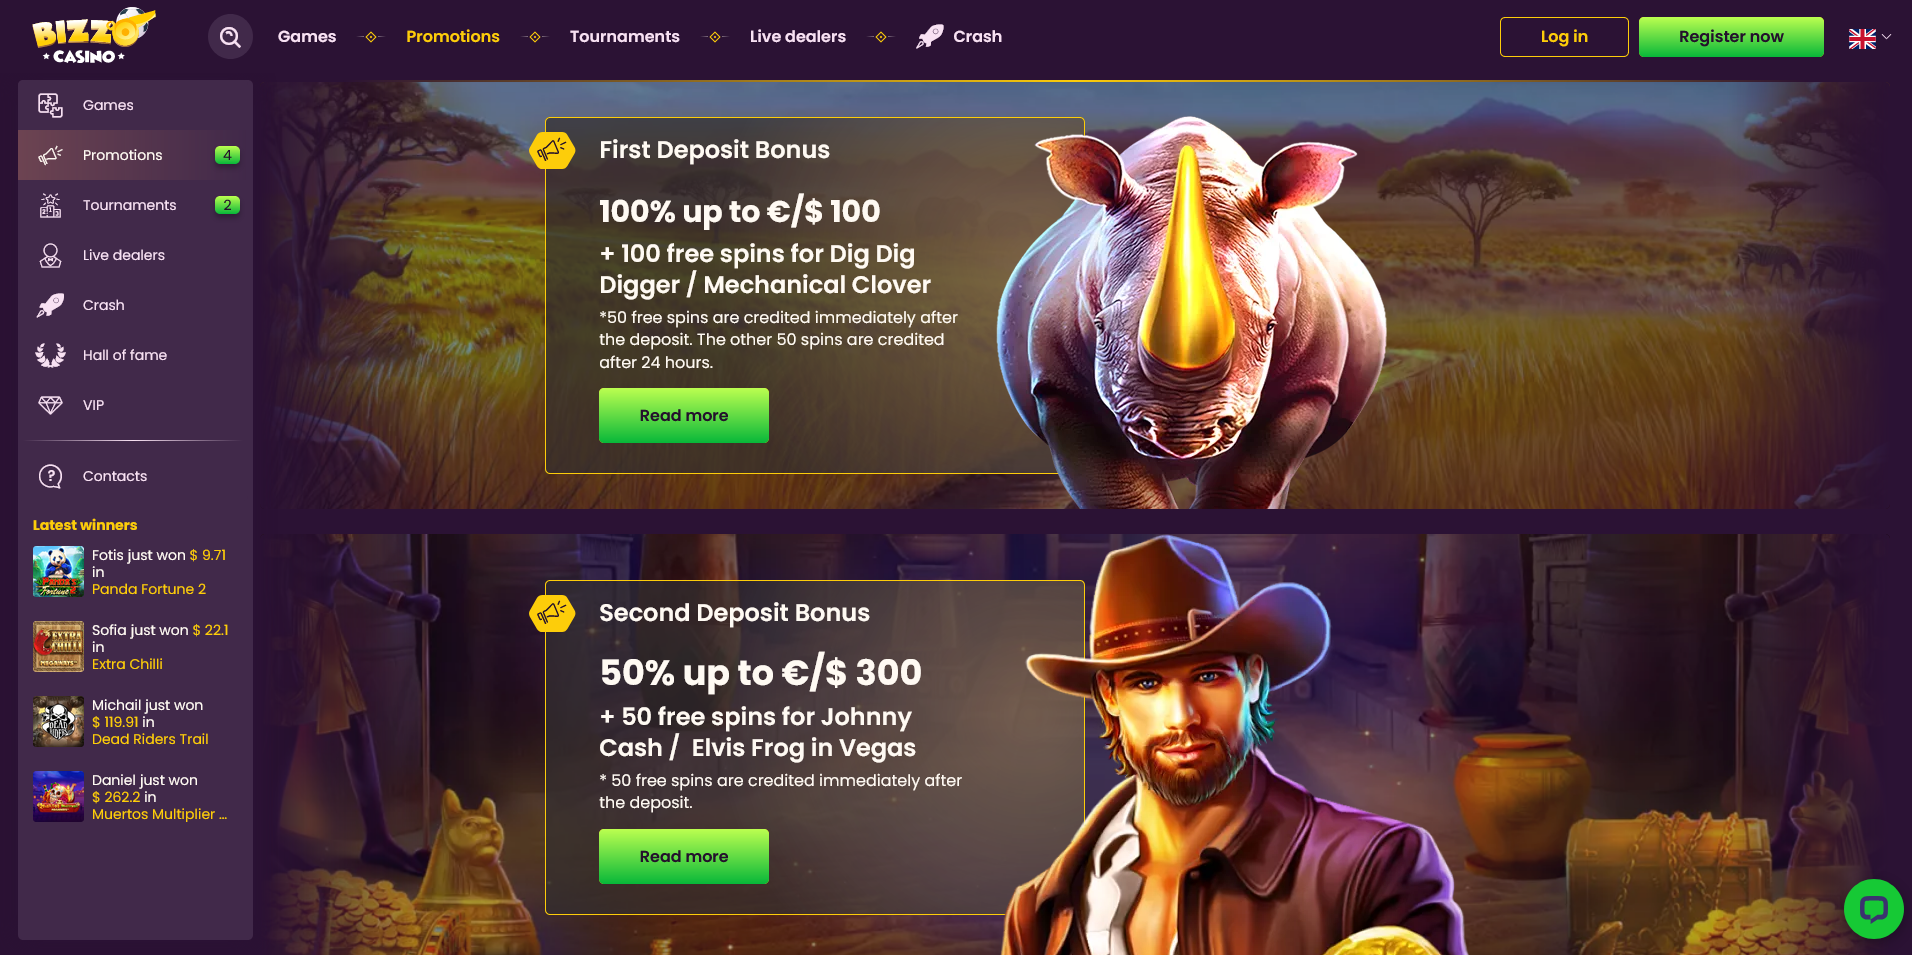 Screenshot of the Bizzo Casino Promotions Page